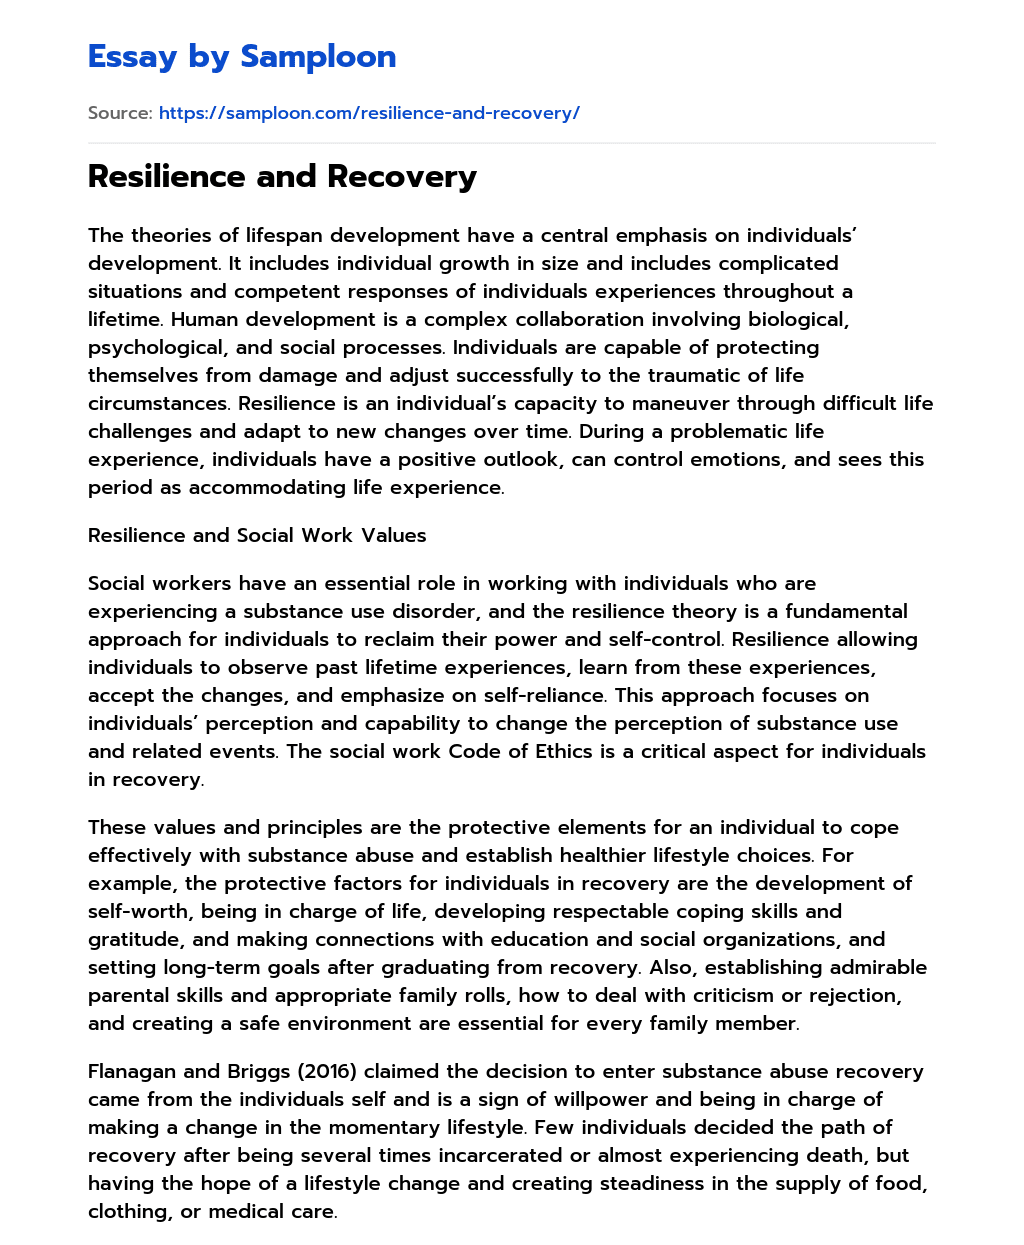 Resilience and Recovery essay